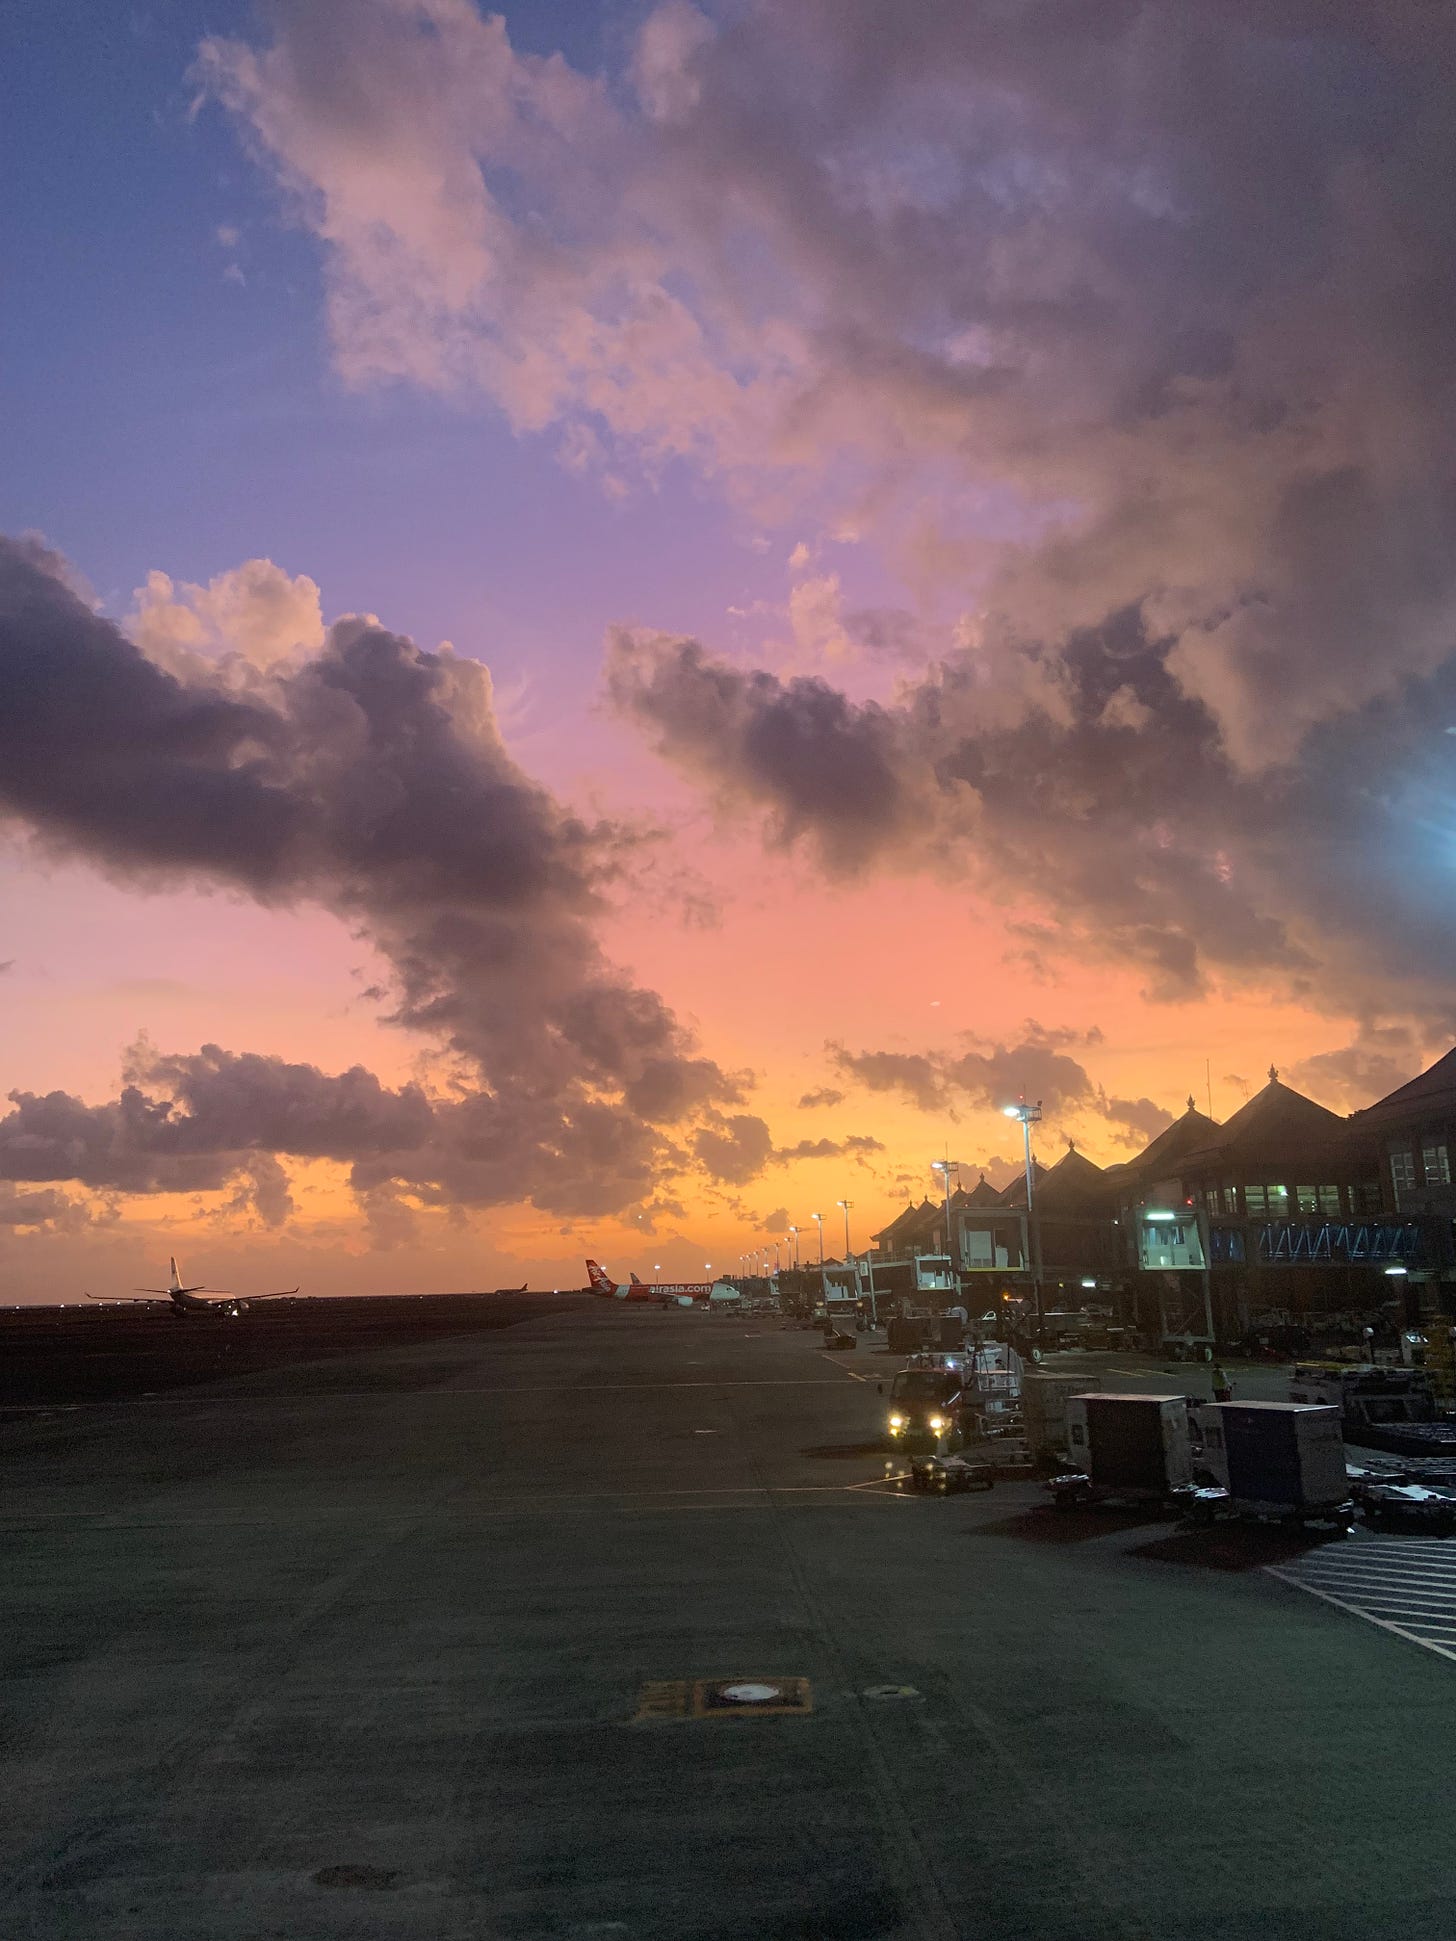 Orange, purple, and blue sunset over clouds at Bali's international airport